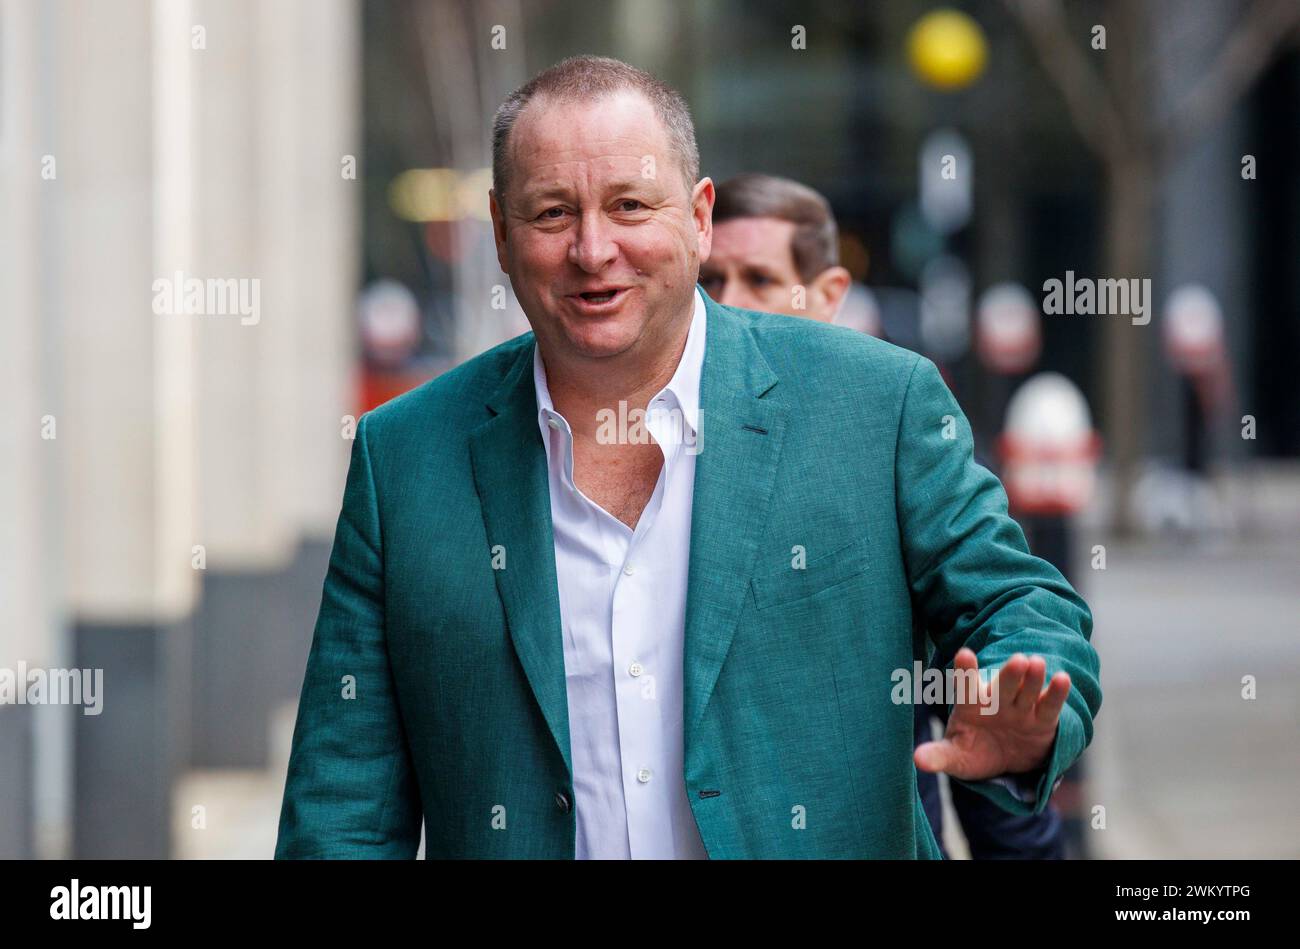 London, UK 23 Feb 2024 Mike Ashley arrives at the High Court. Mike Ashley's company, Fraser Group, is taking Morgan Stanley to court. Mike Ashley's Frasers Group has accused Morgan Stanley of “snobbery” over its decision to impose a $1bn margin call, claiming the bank's move was driven partly by the entrepreneur's humble beginnings. Mike Ashley said Morgan Stanley sought to force the UK retailer out of a position it held in German brand Hugo Boss and said the demand for collateral was completely unbelievable. The dispute relates to long positions Frasers started to accumulate in Hugo Boss fr Stock Photo